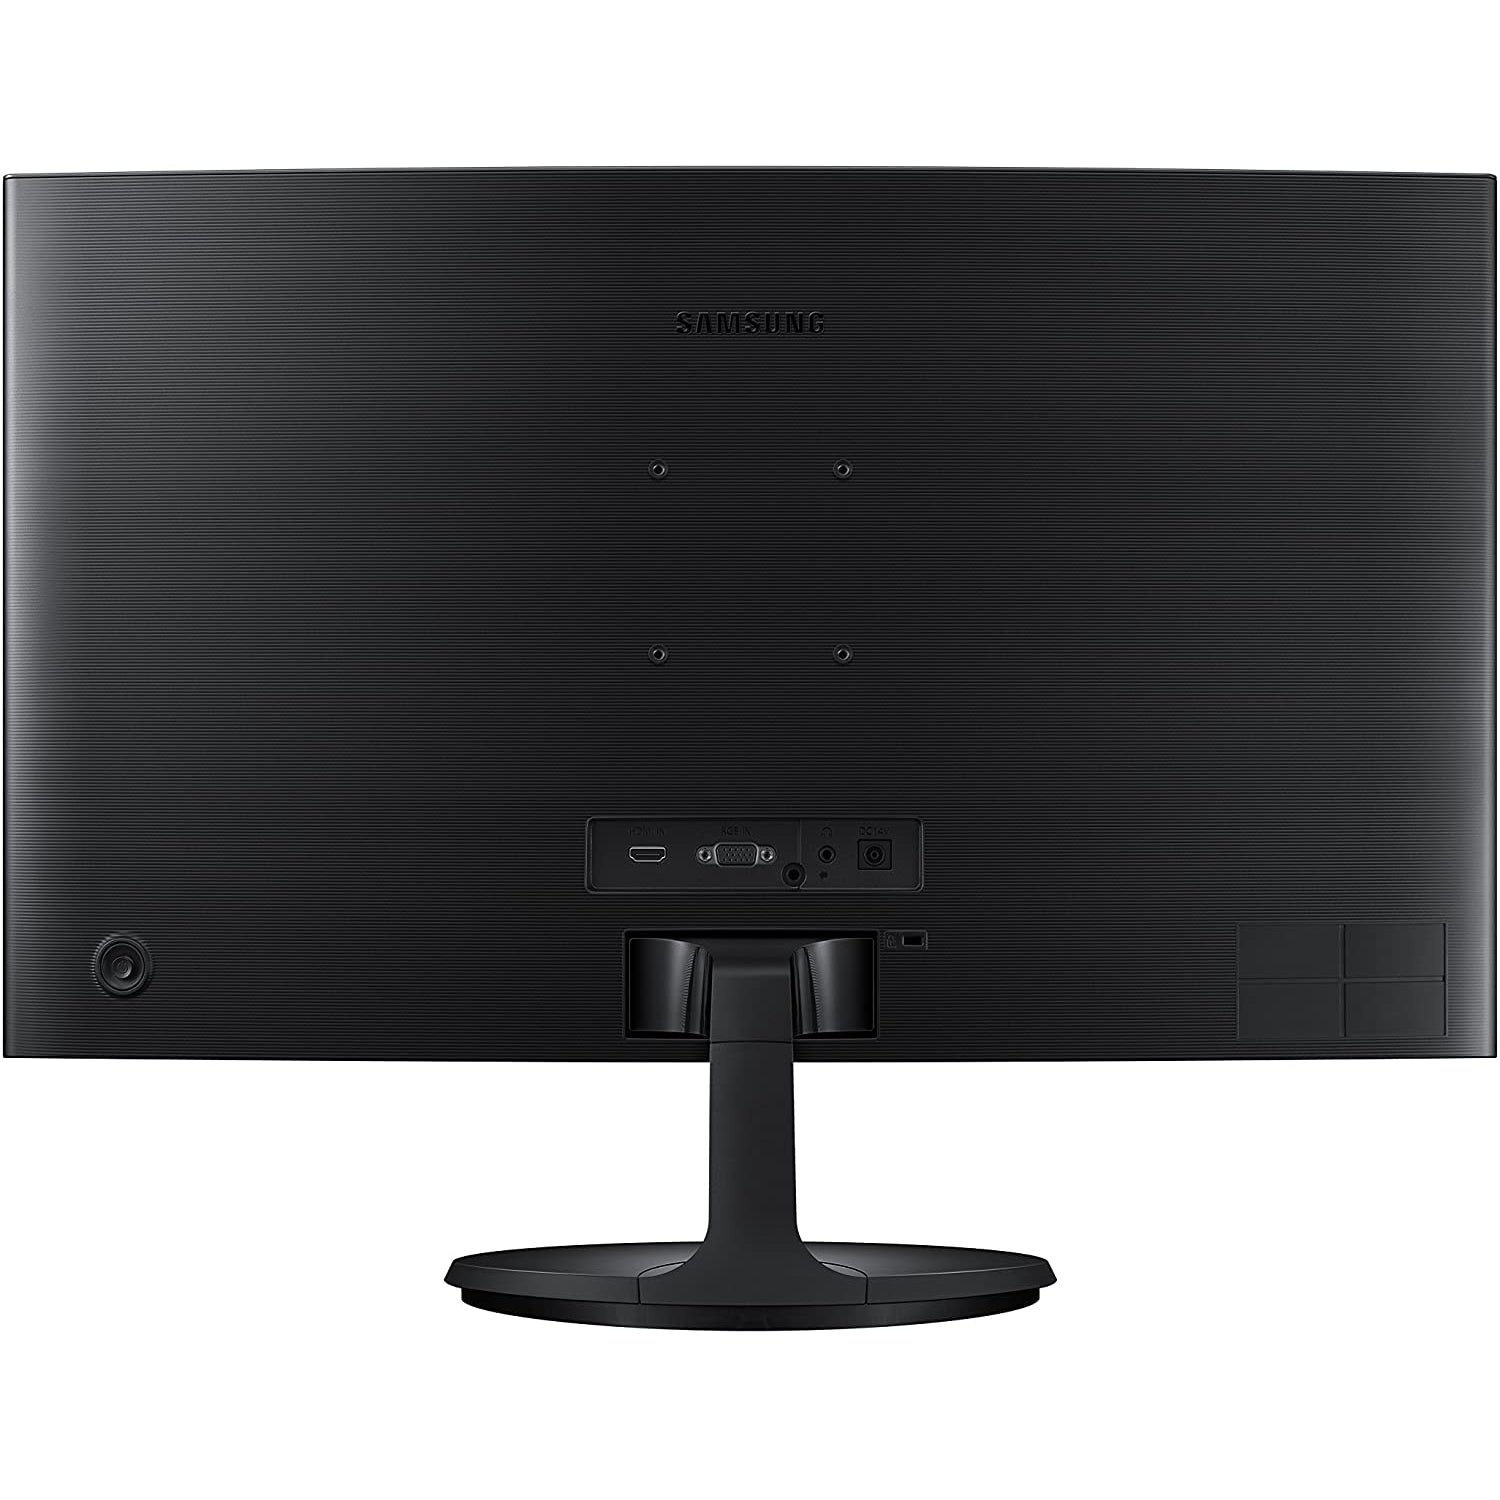 Samsung C27F398FWU 27-Inch Curved LED Monitor (Missing Stand)